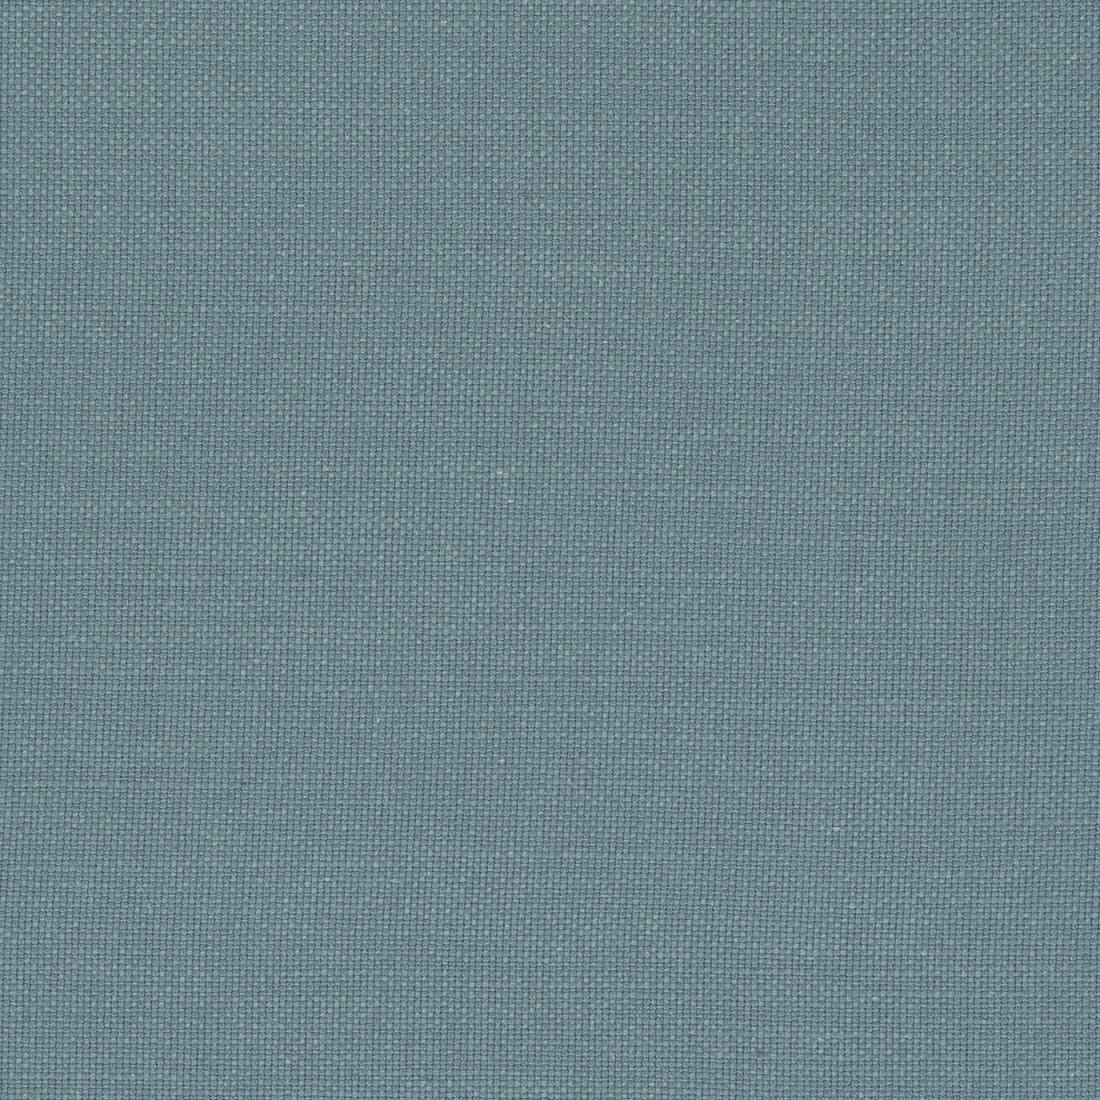 Nantucket fabric in lagoon color - pattern F0594/28.CAC.0 - by Clarke And Clarke in the Clarke &amp; Clarke Nantucket collection